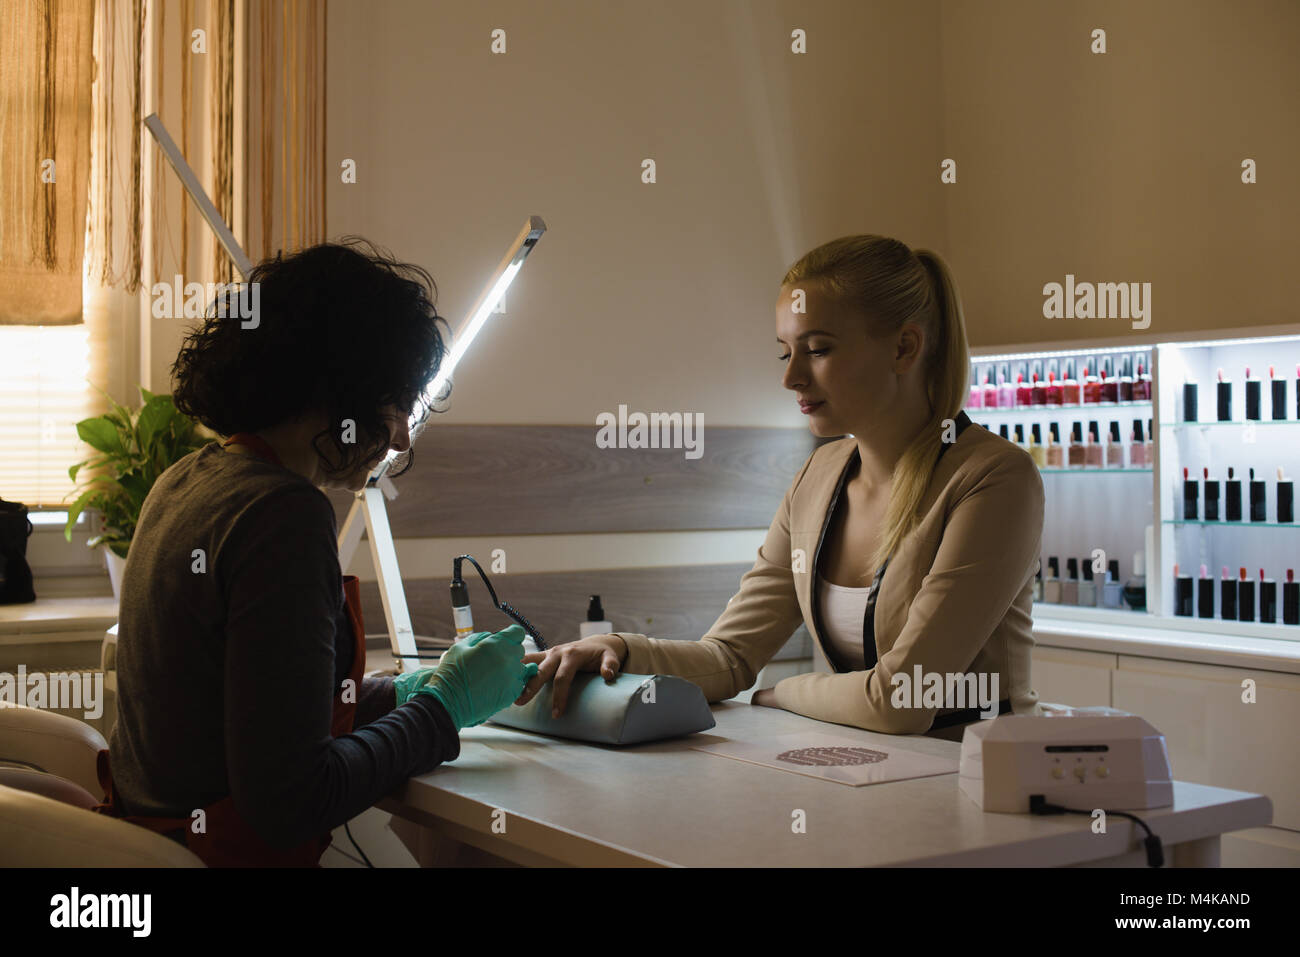 Beautician giving manicure treatment to female customer Stock Photo